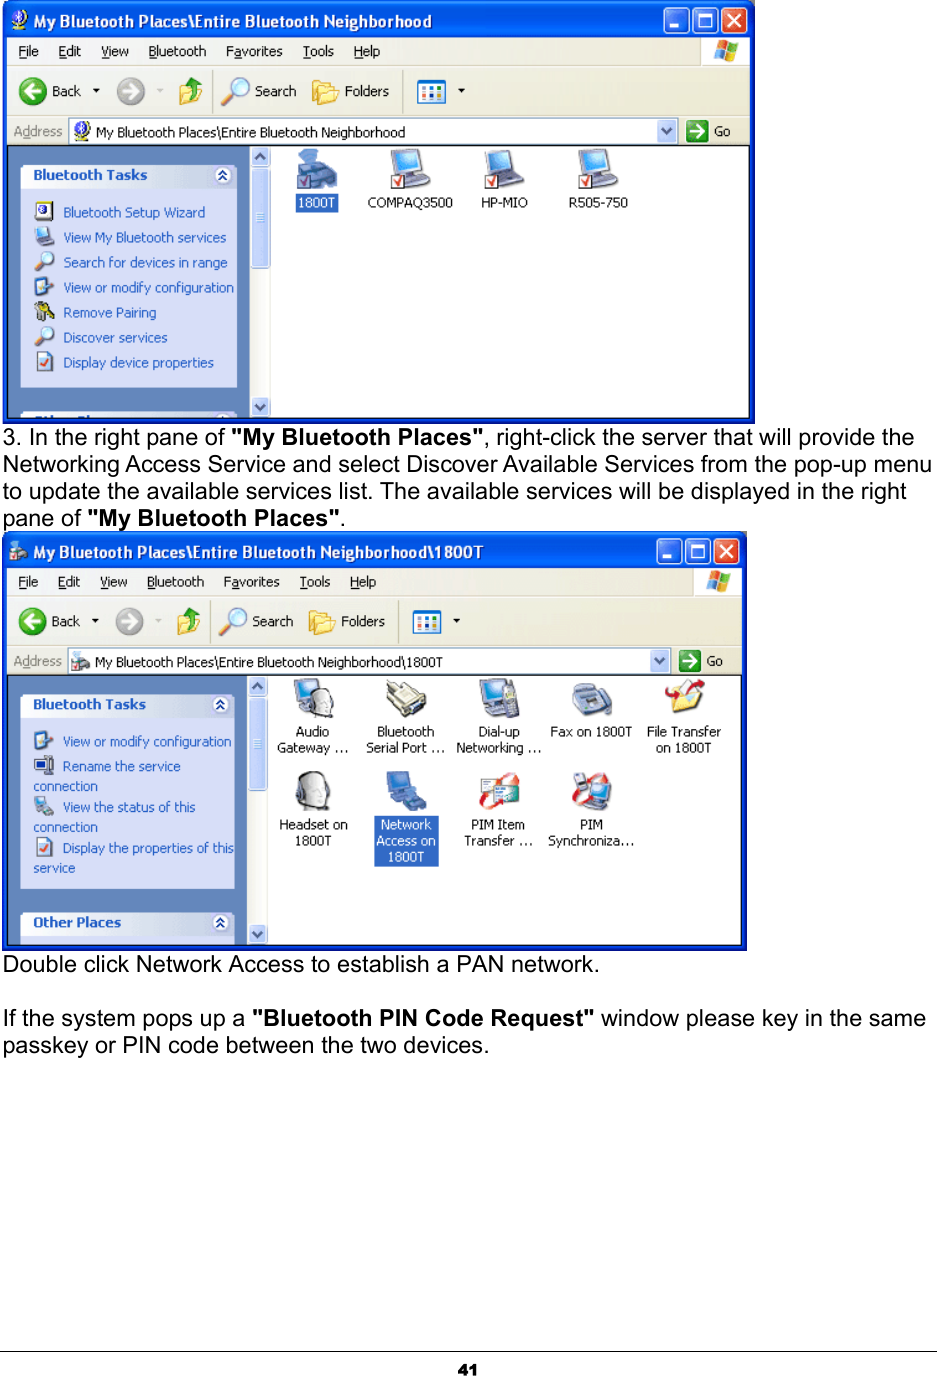   41 3. In the right pane of &quot;My Bluetooth Places&quot;, right-click the server that will provide the Networking Access Service and select Discover Available Services from the pop-up menu to update the available services list. The available services will be displayed in the right pane of &quot;My Bluetooth Places&quot;.  Double click Network Access to establish a PAN network.   If the system pops up a &quot;Bluetooth PIN Code Request&quot; window please key in the same passkey or PIN code between the two devices.  